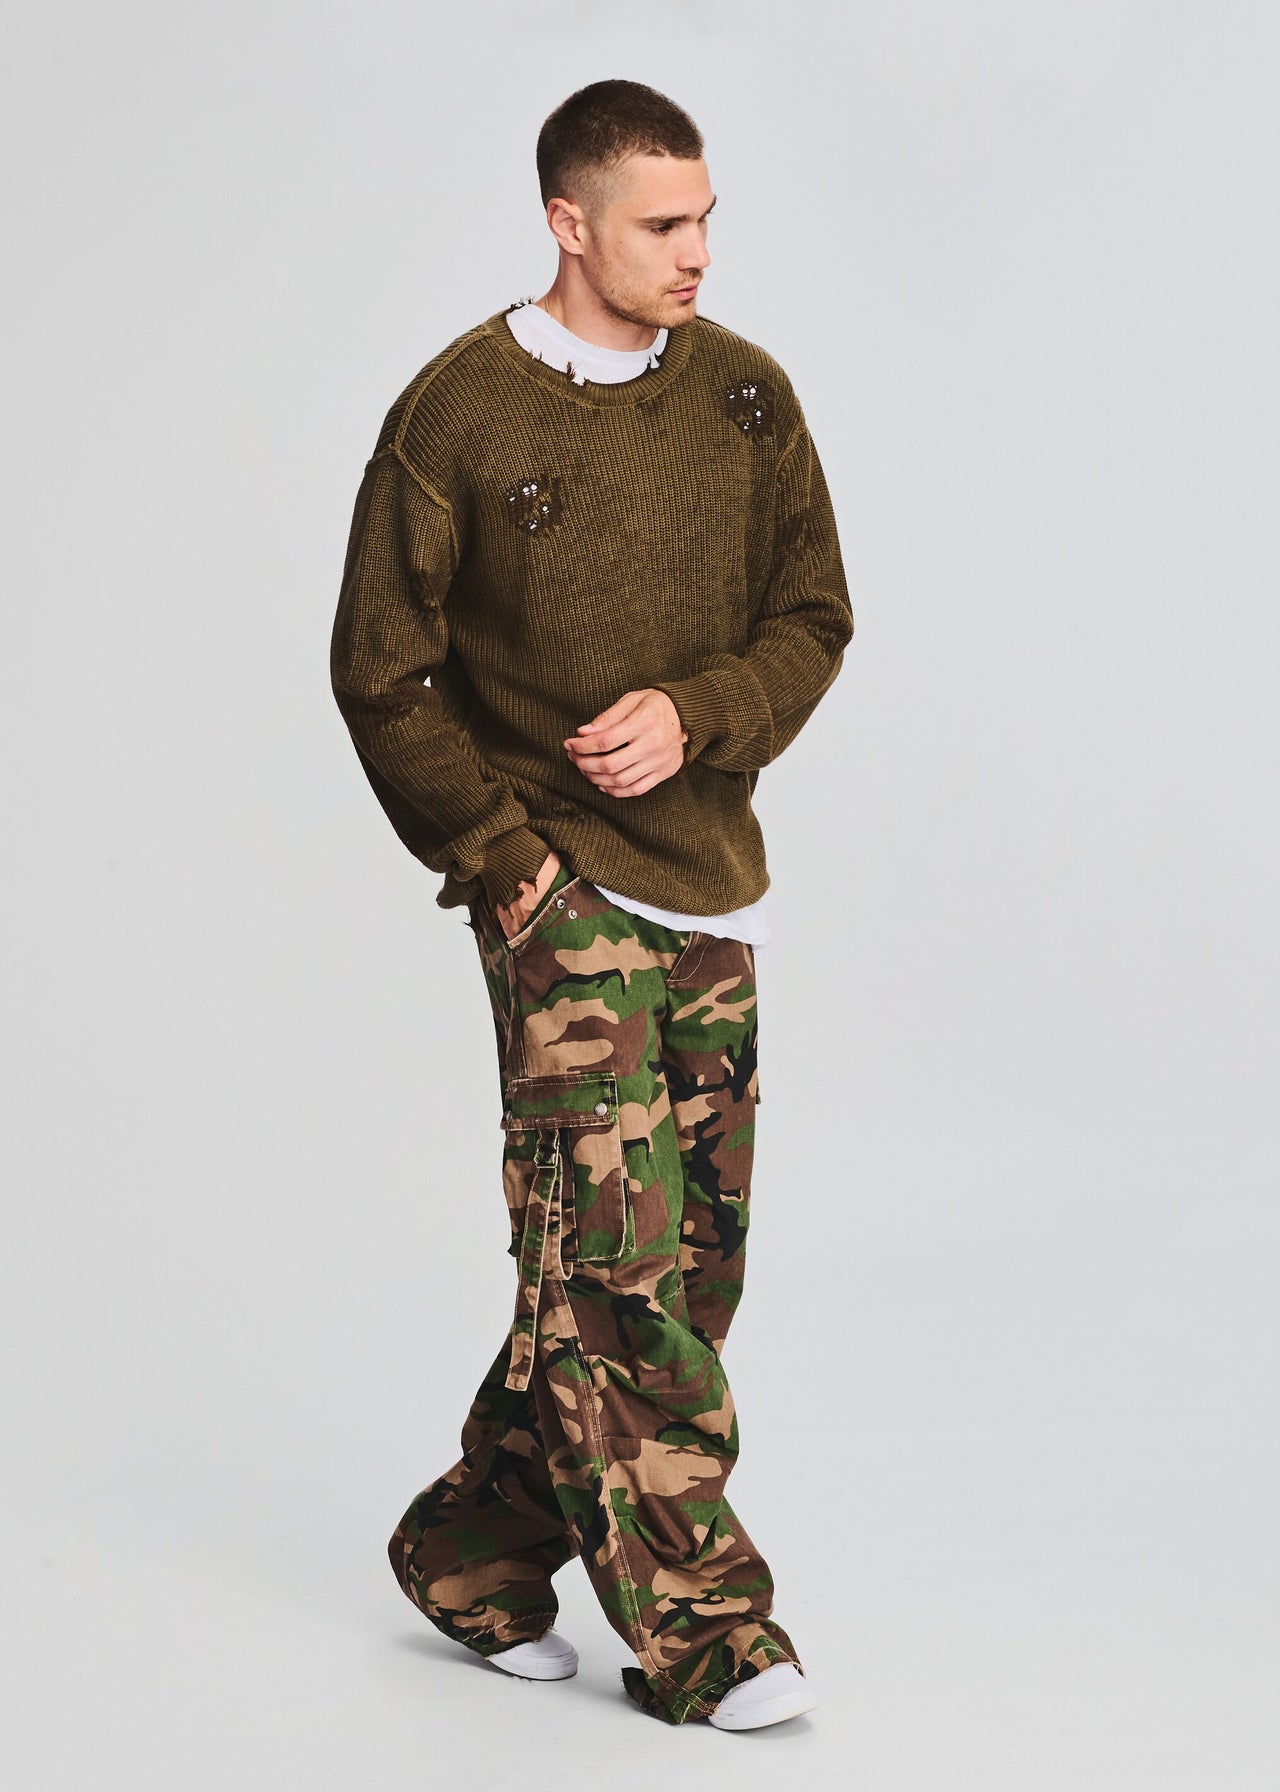 Grey Camo Print Cargo Trousers - Janes Stall